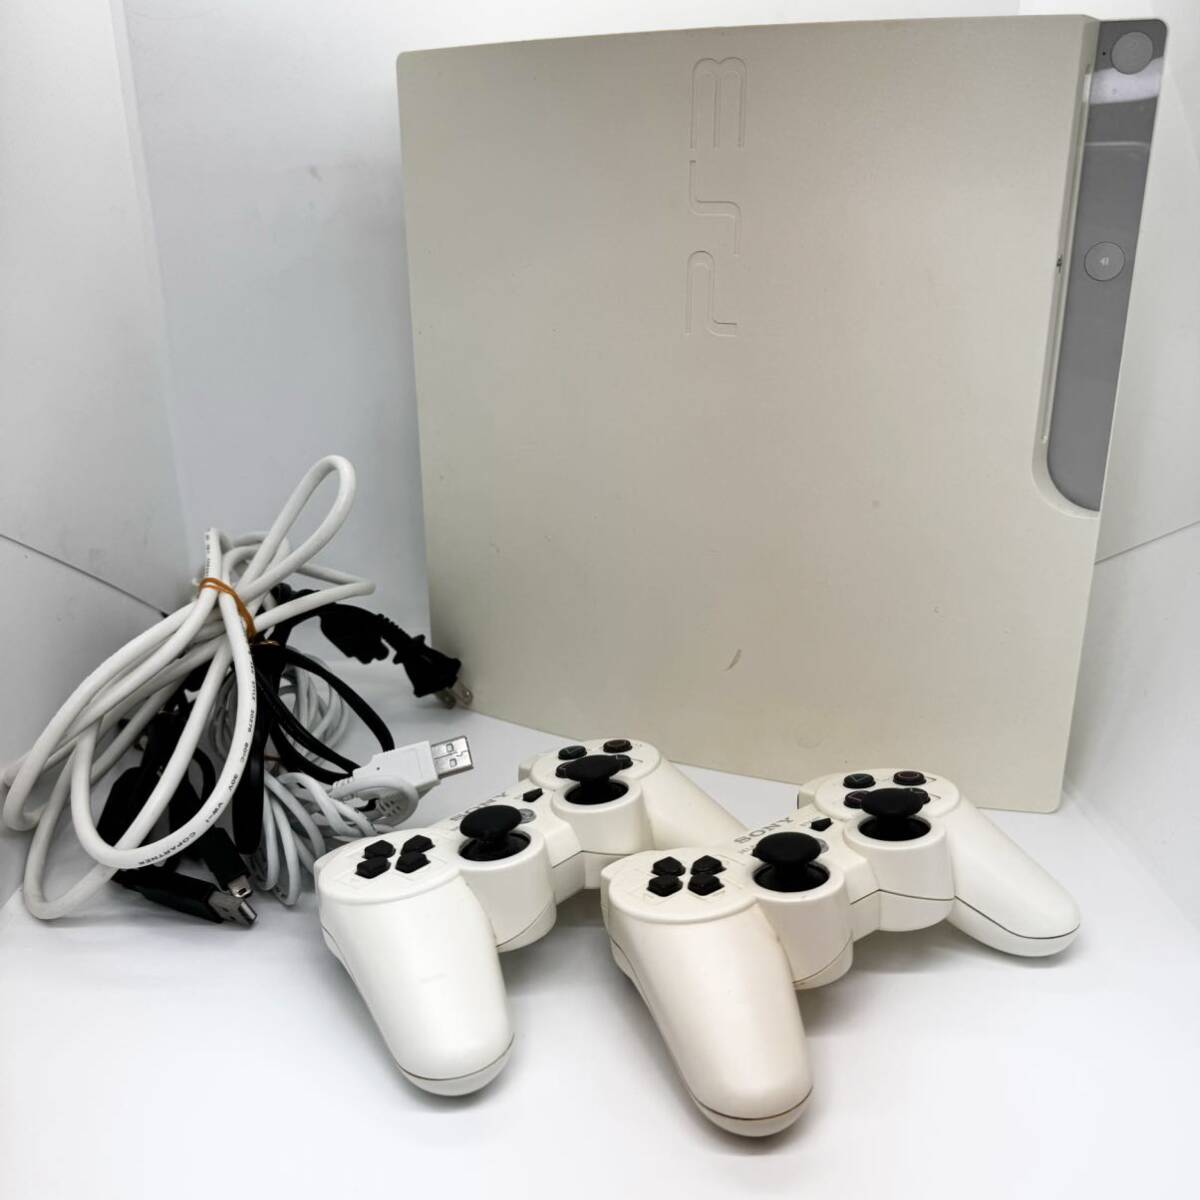 SONY ソニー PlayStation3 CECH-3000A ホワイト PS3 動作確認済み 初期化済み コントローラー2個セット _画像1